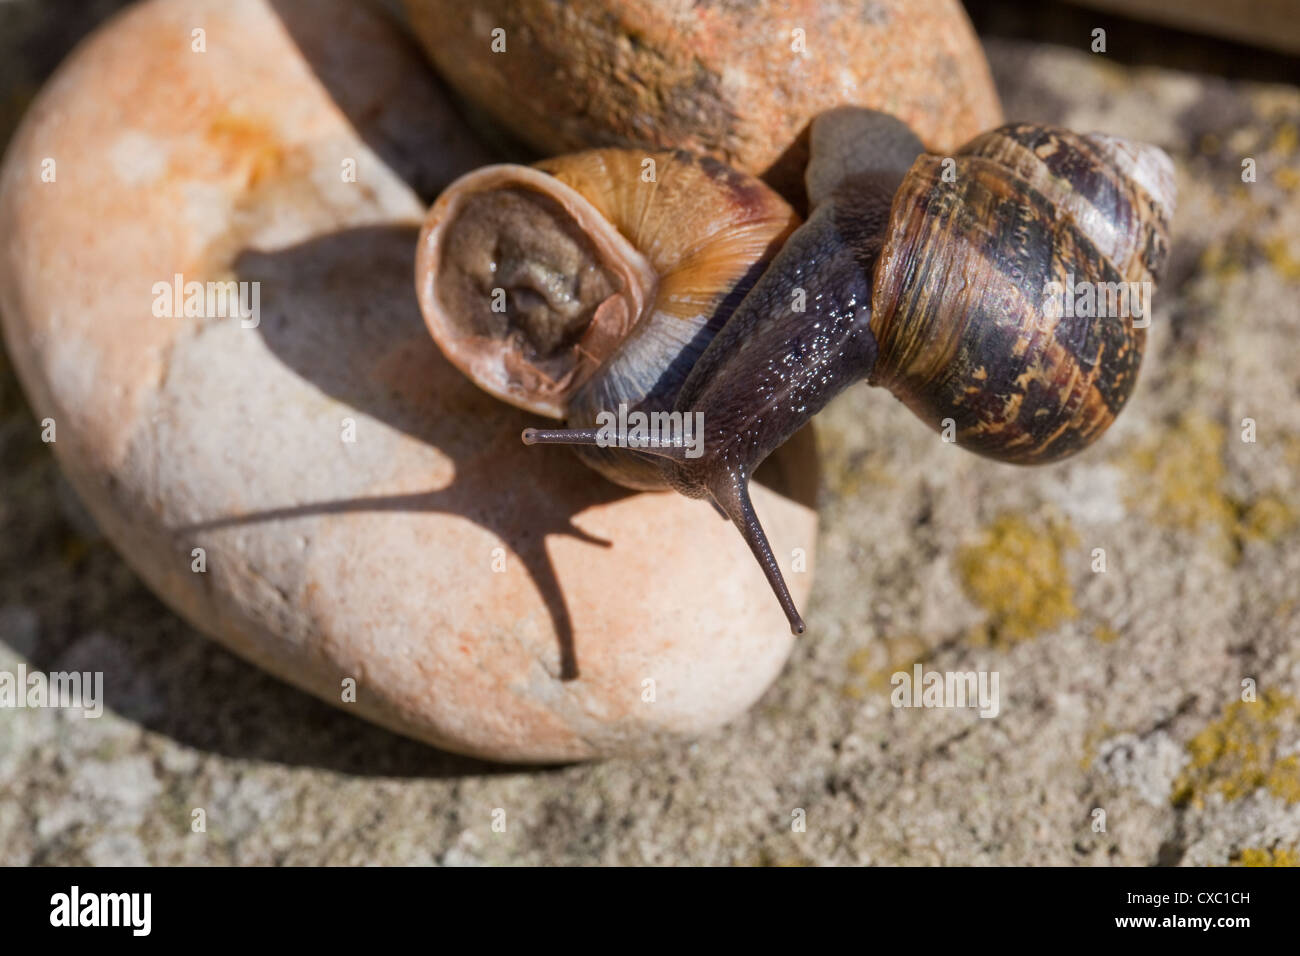 Garden Snails (Helix aspersa). One clambering over another, showing eyes 'on stalks', or upper tentacles on the head. Stock Photo